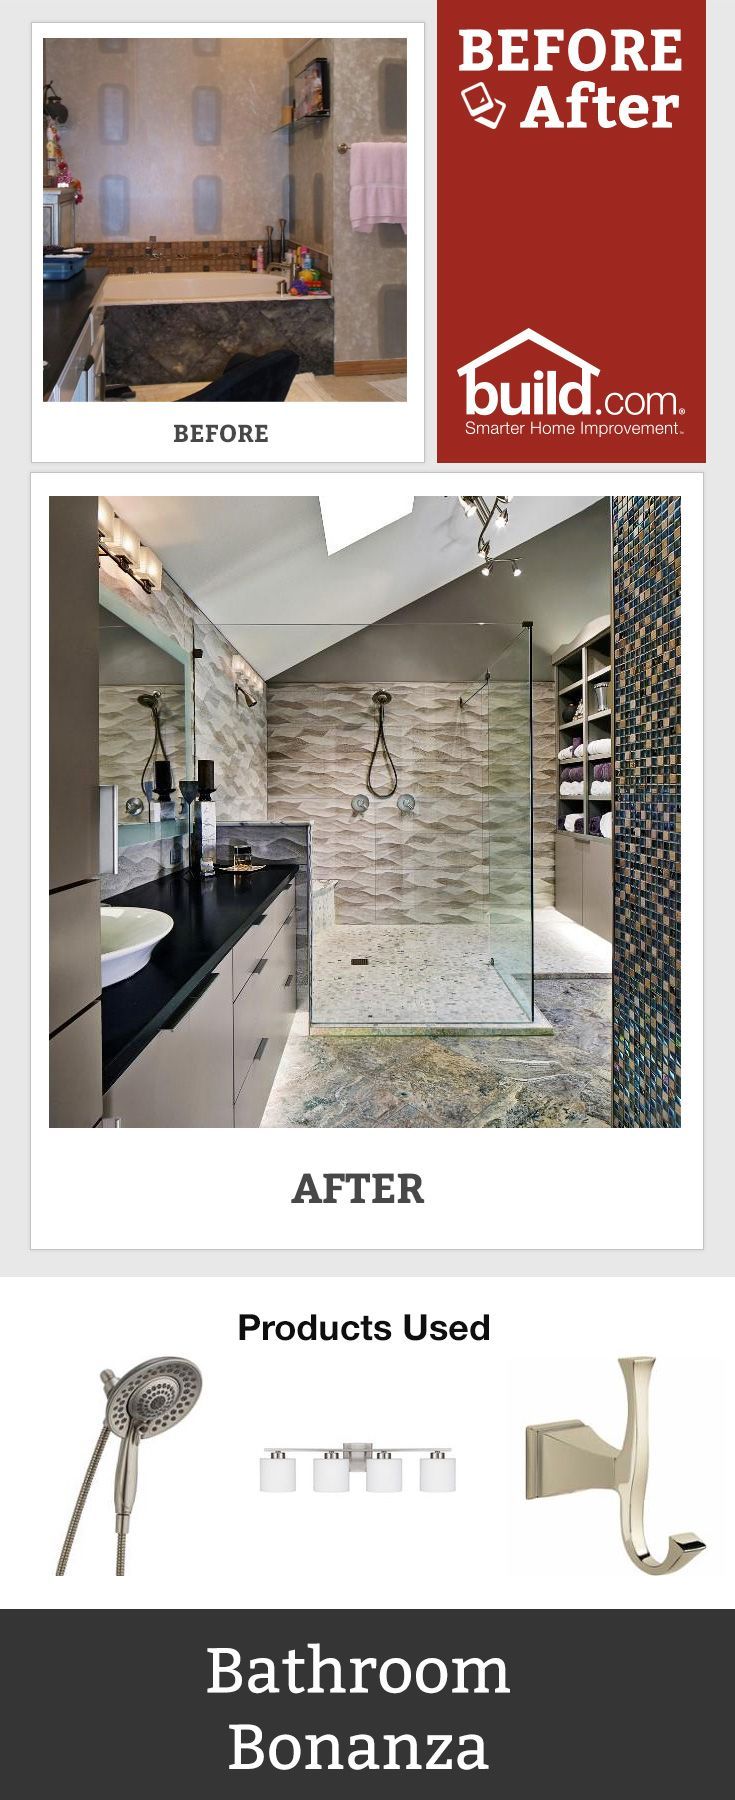 Spruce up your bathroom design and get some helpful ideas with our before and after bathroom galleries. Get inspired to make the